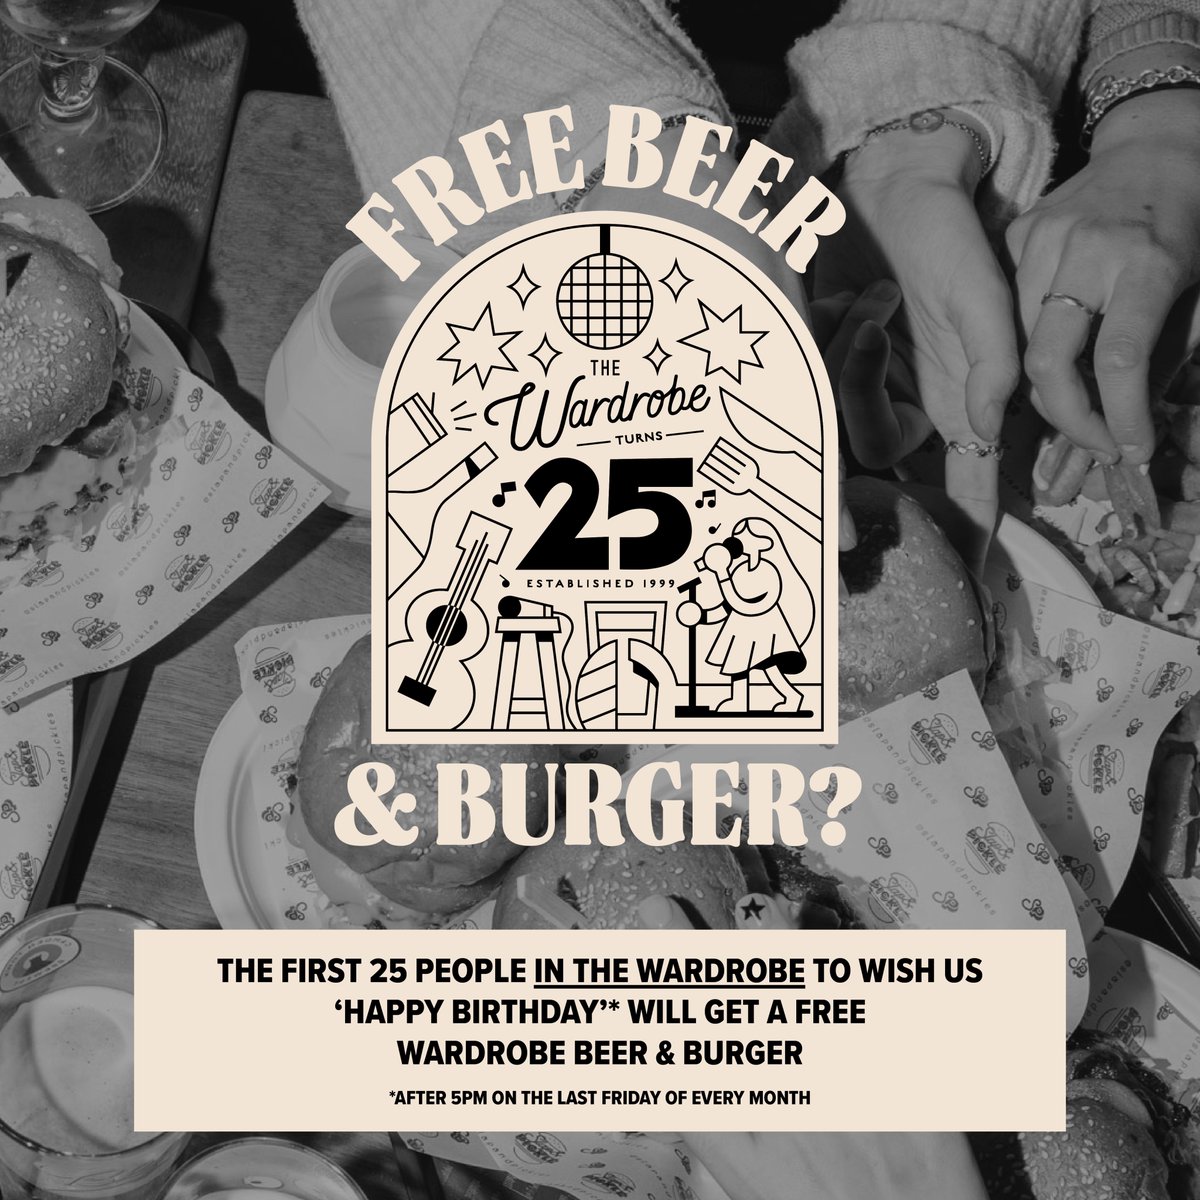 📣 FREE BURGERS & PINTS! 📣 The first 25 people to stop by after 5pm tomorrow who wish us happy birthday at the bar get themselves a free burger and pint - it's that simple! 🍔🍺